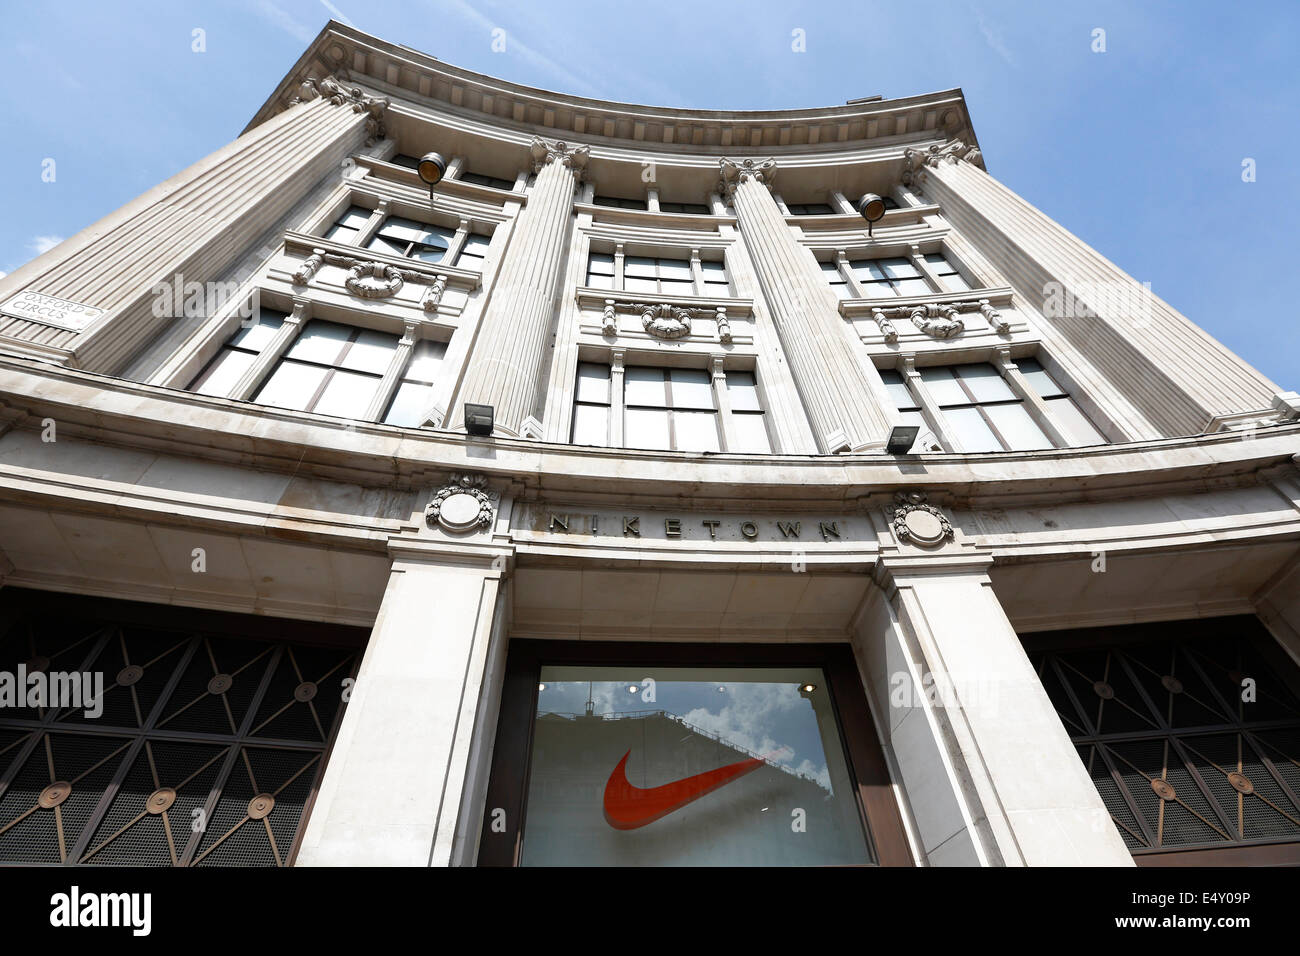 Nike town london High Resolution Stock Photography and Images - Alamy